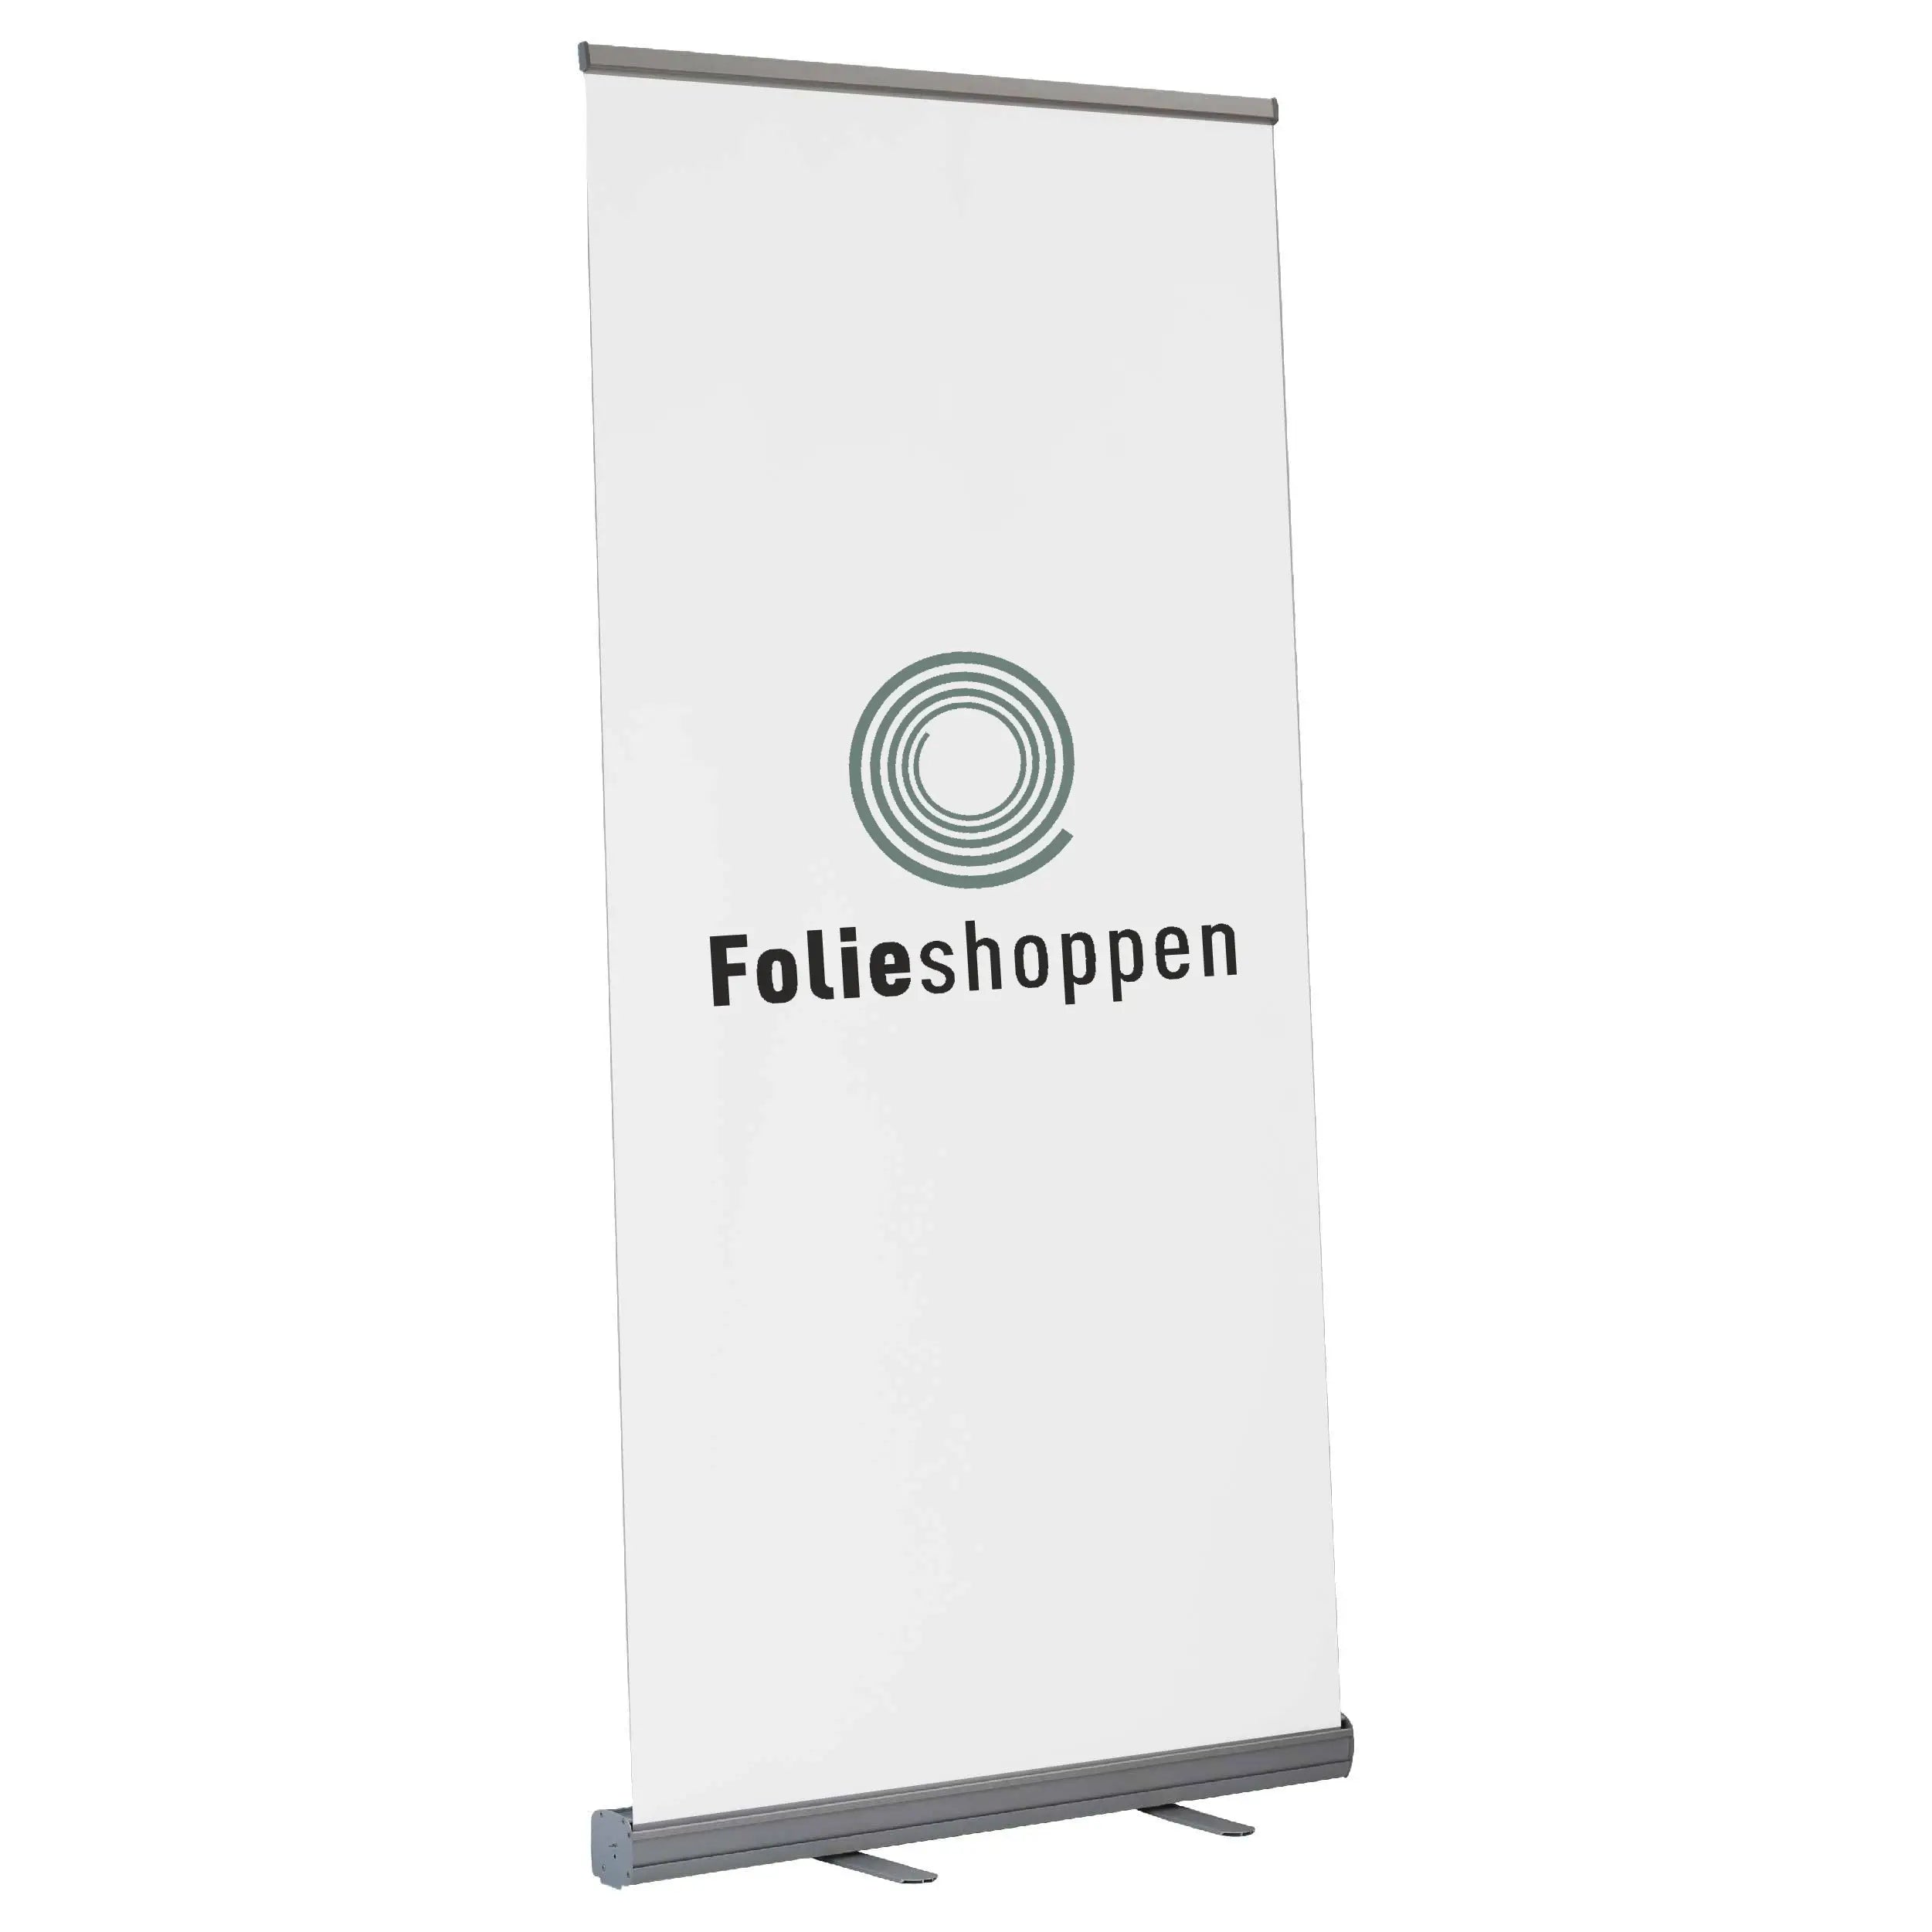 Eco - Roll up - 85 x 200 cm inkl banner